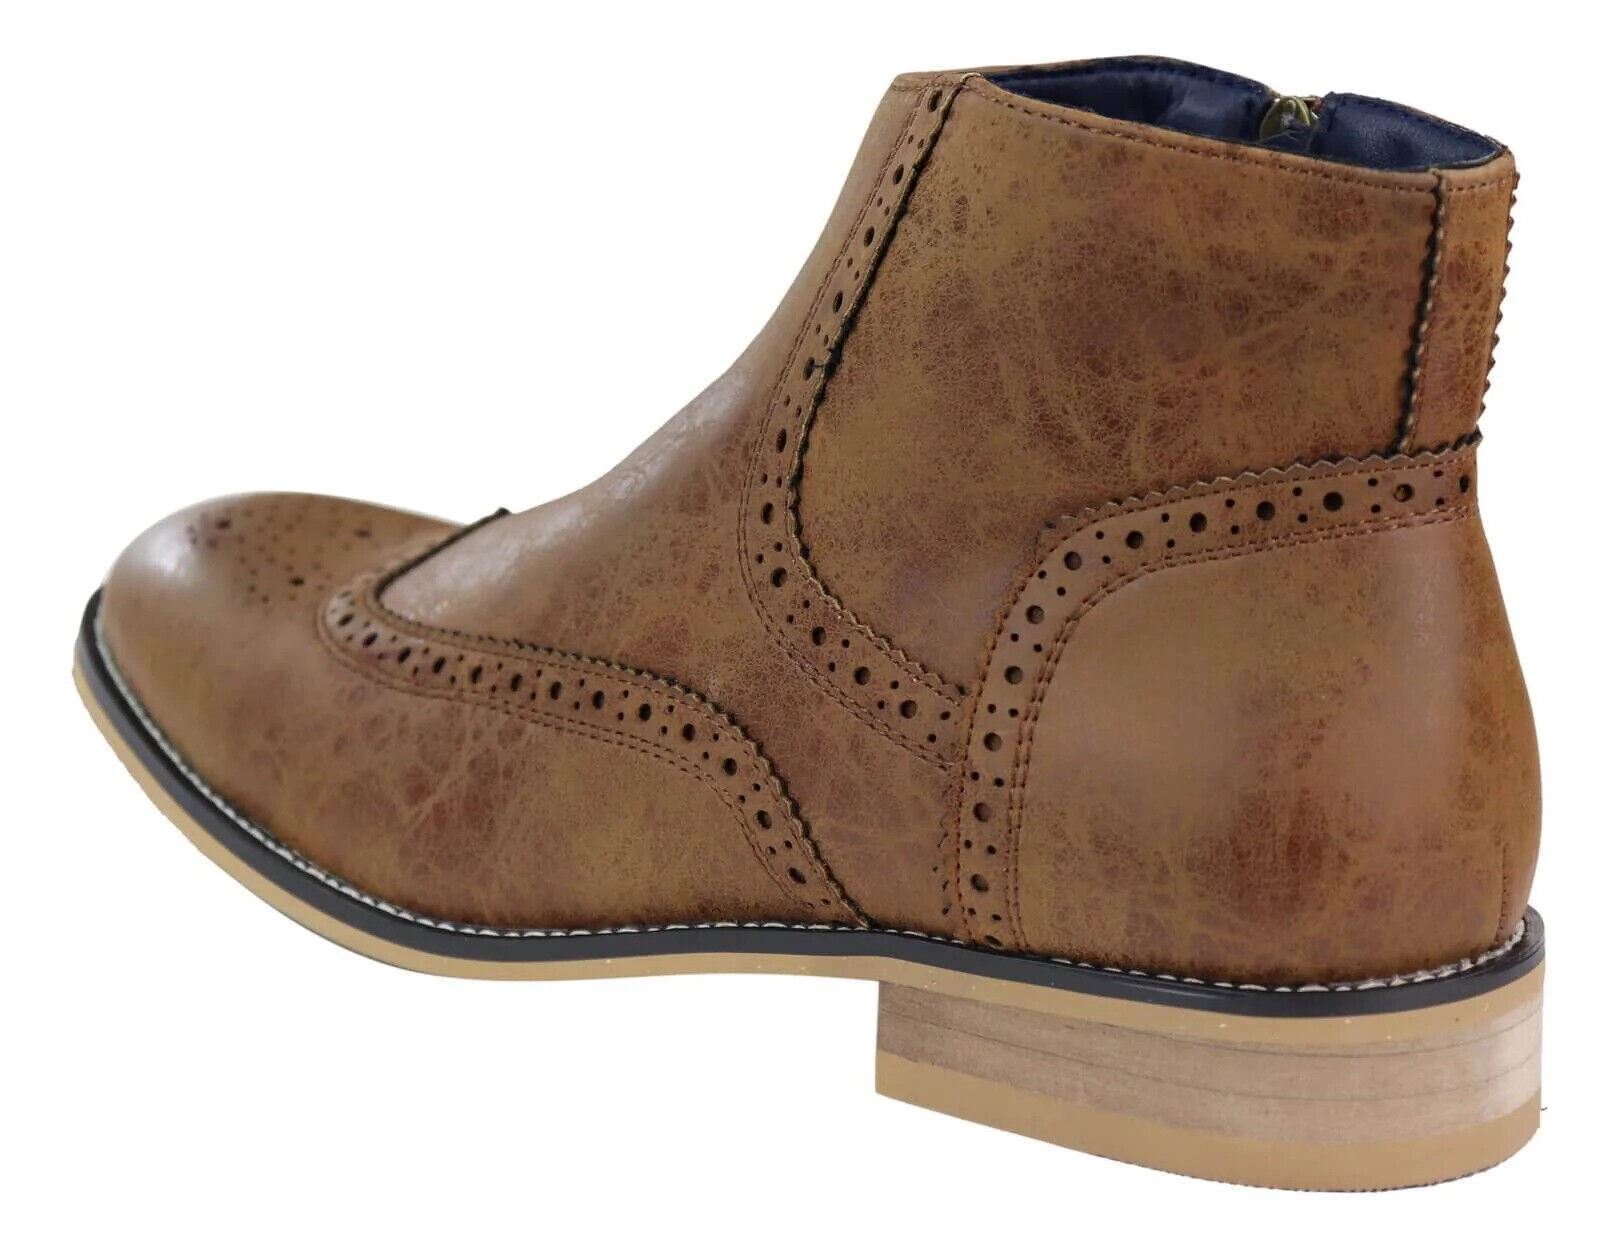 Mens Tan Leather Brogue Zip Up Chelsea Boots